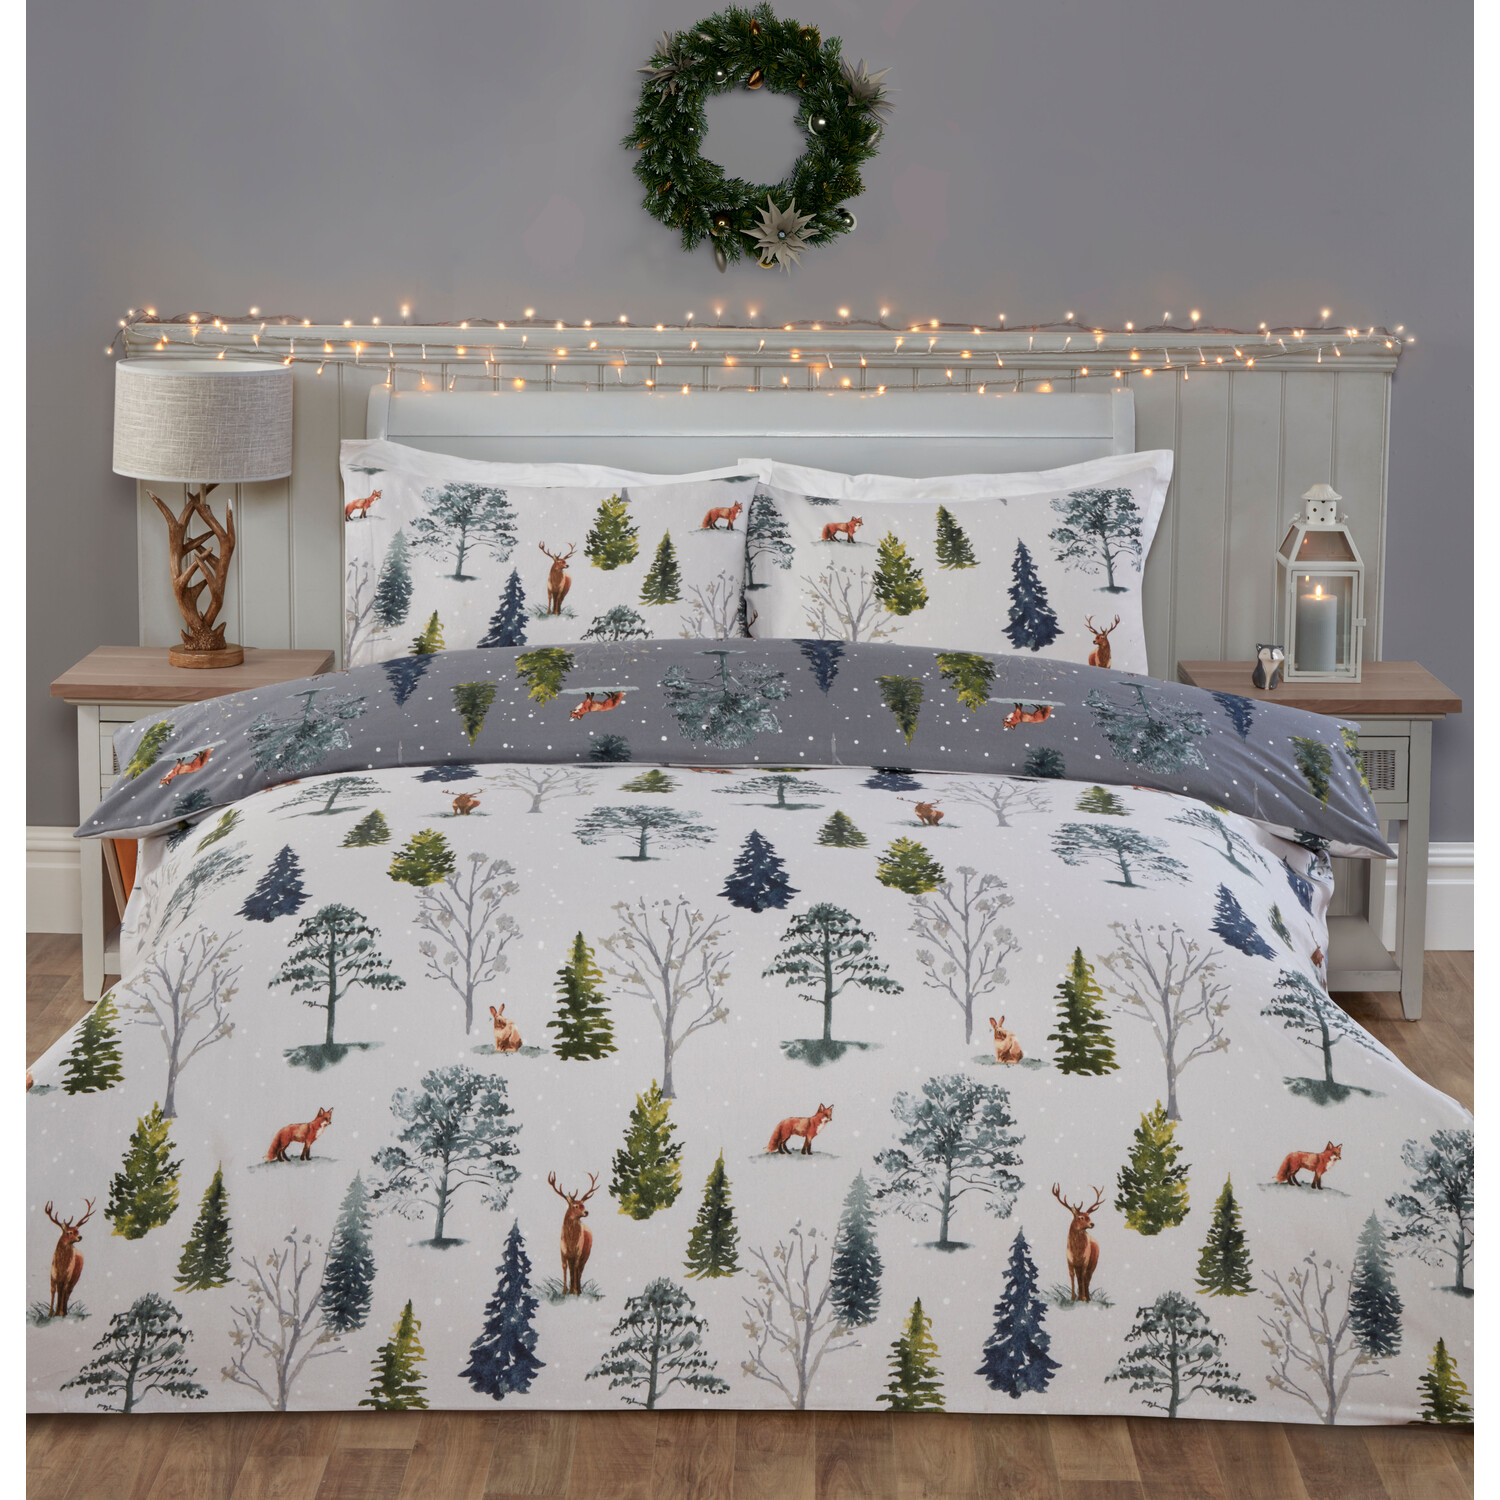 Snowy Forest Duvet Cover and Pillowcase Set - Grey / Superking Image 2